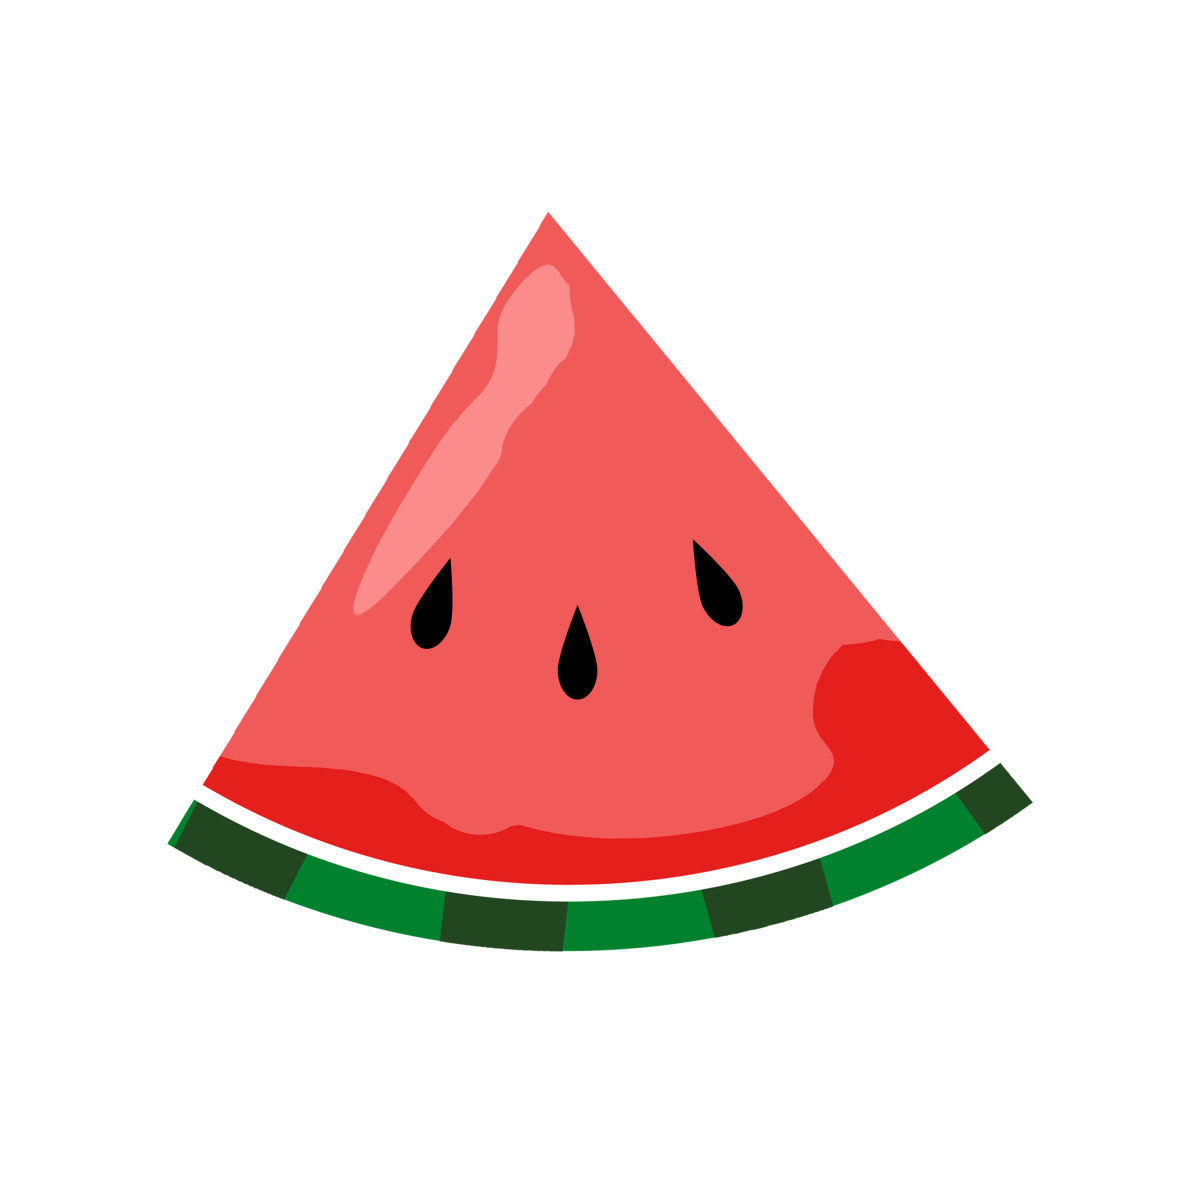 Of watermelon clip art for clipart cliparts for you clipartix.